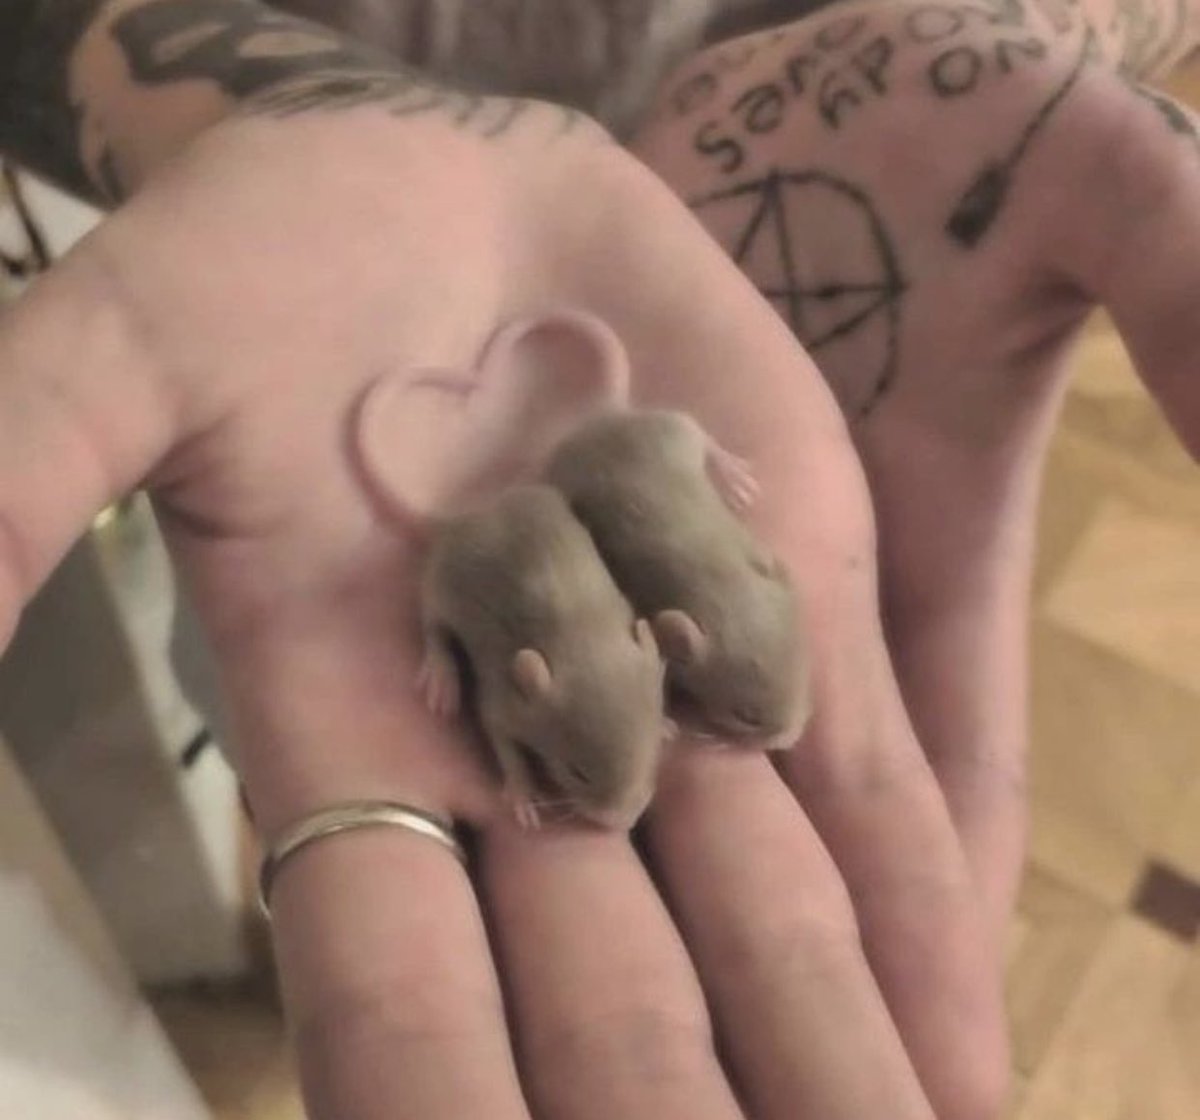 what if we were two lil rats making a heart with our tails